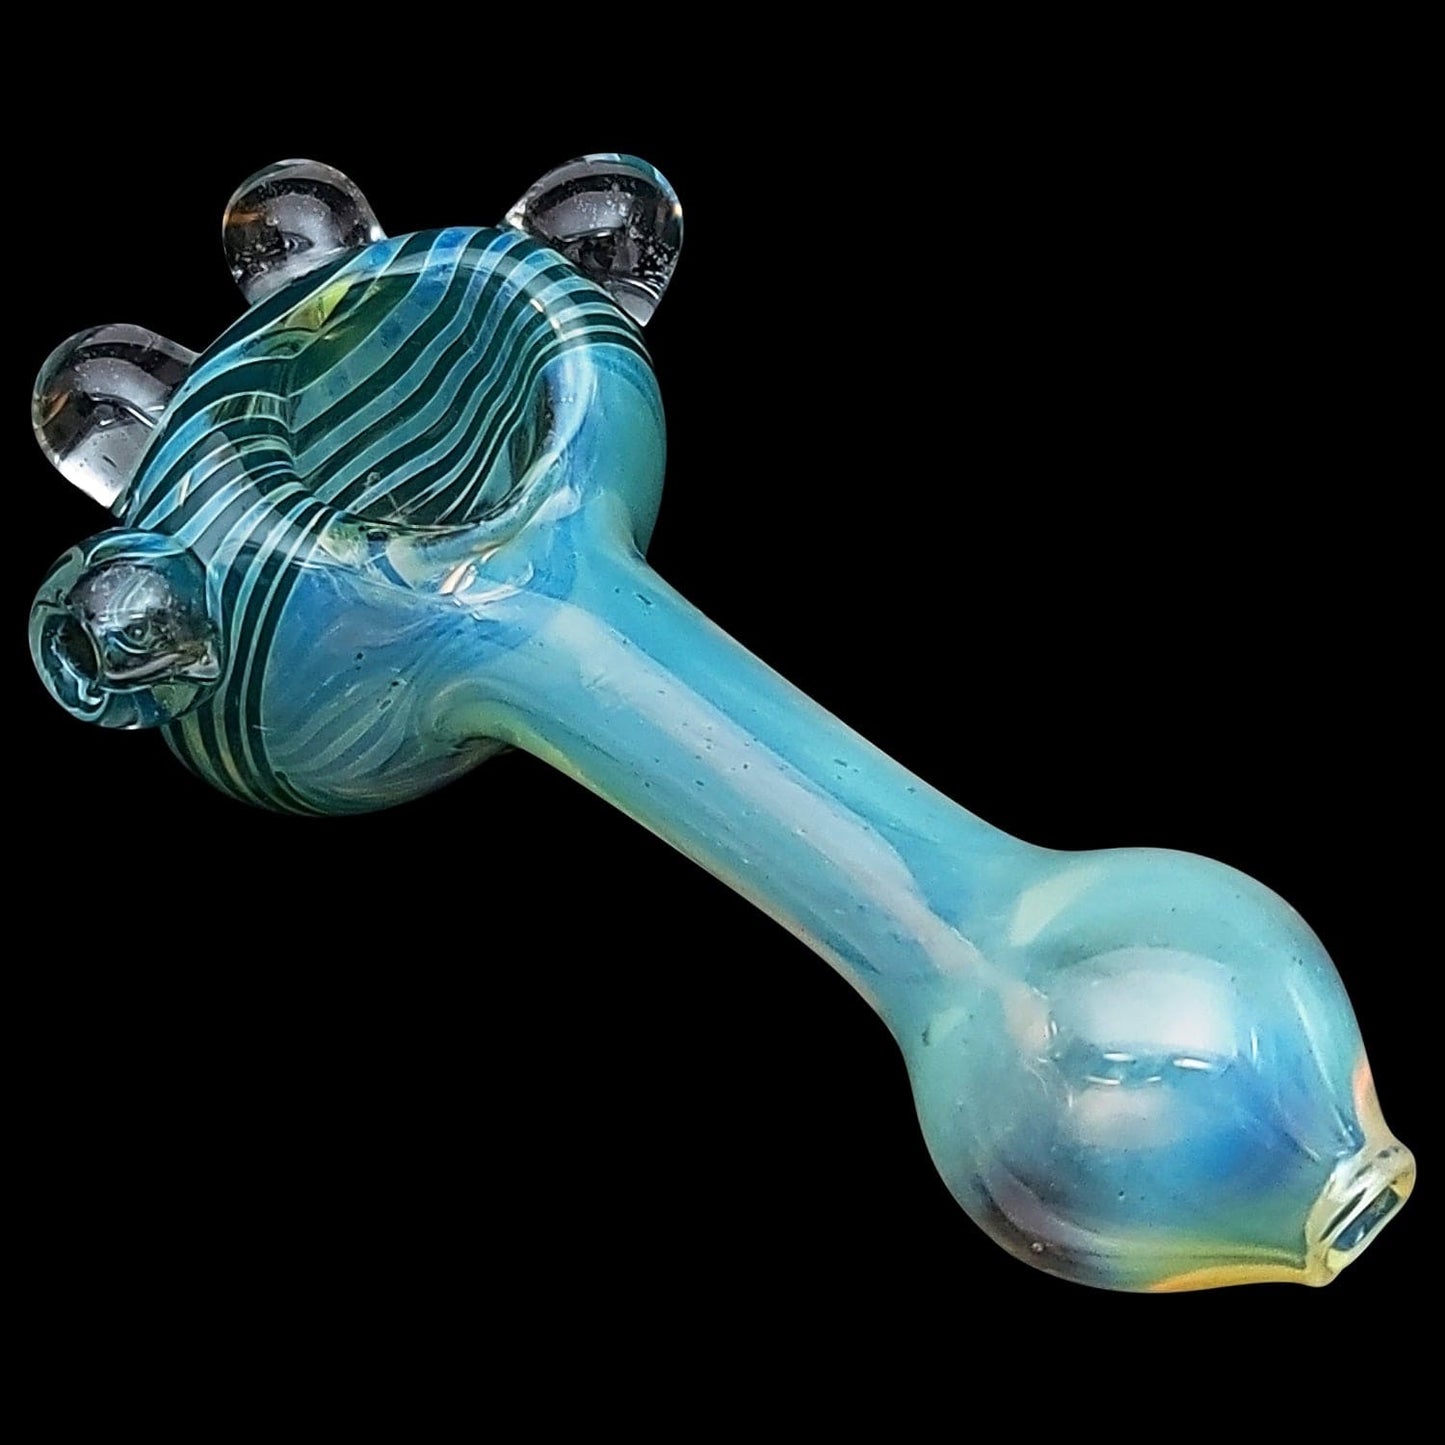 LA Pipes Hand Pipe Teal "Spiral Marble Head" Glass Spoon Pipe